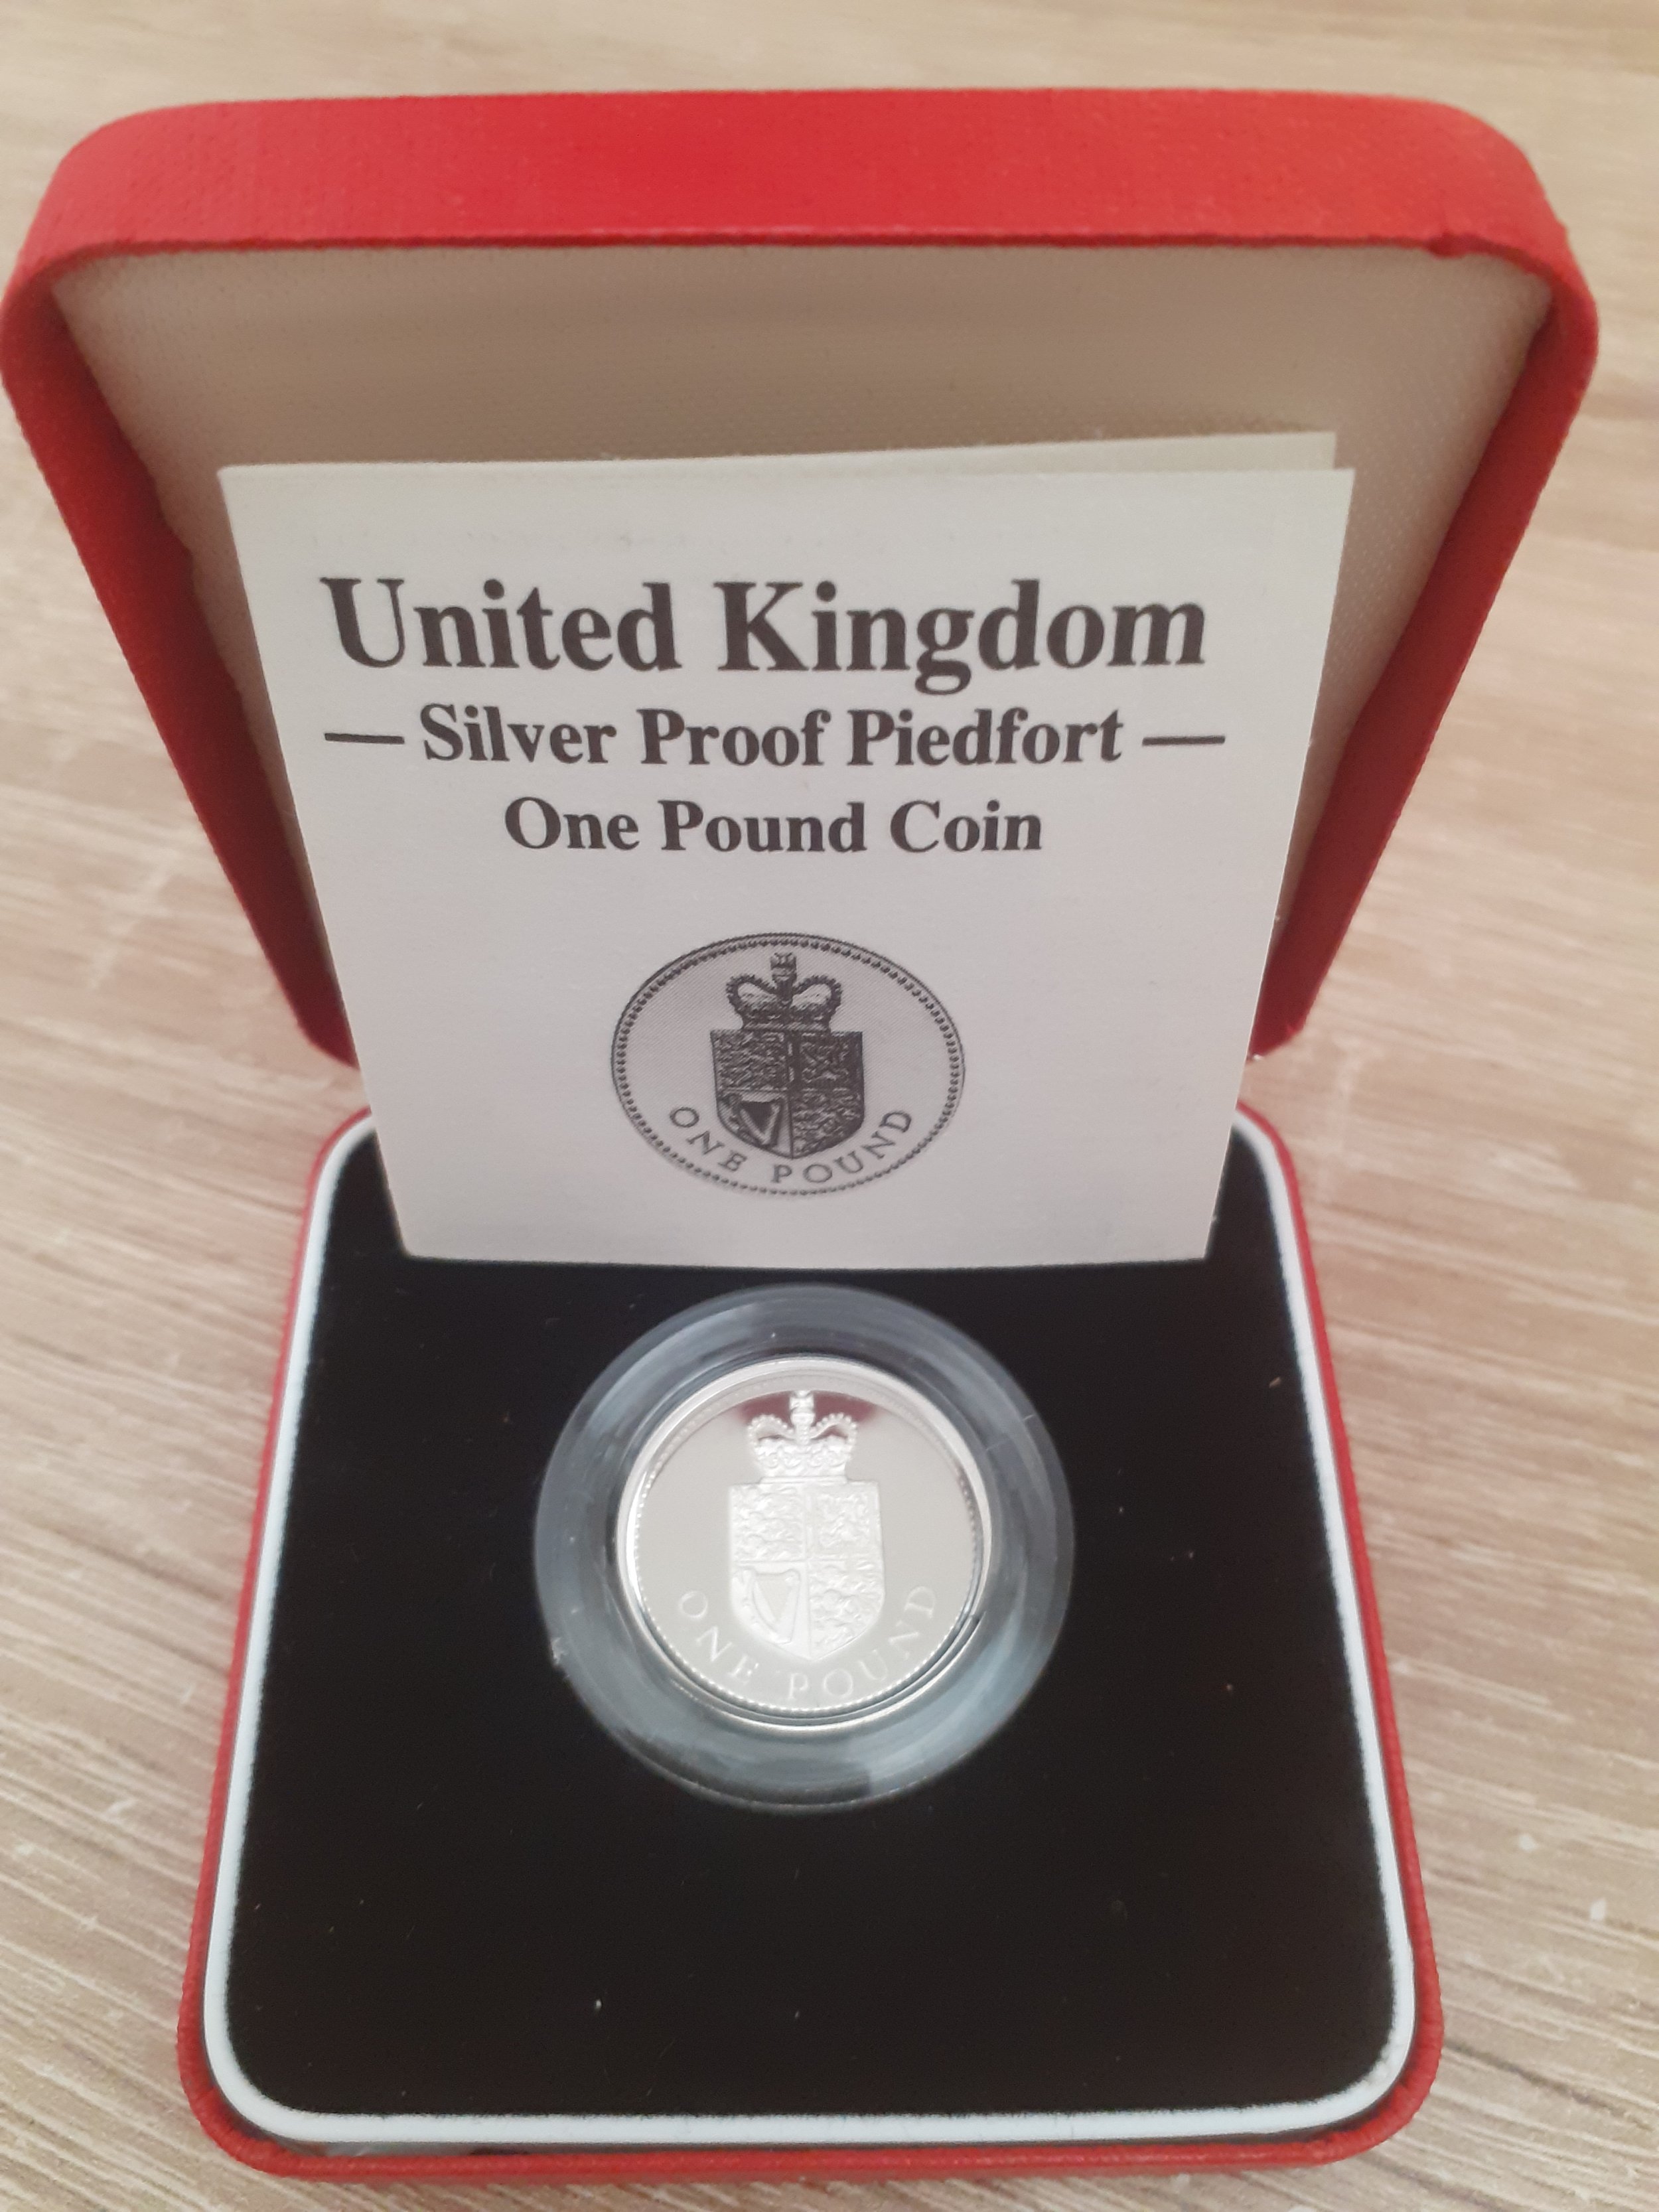 1998 One Pound Silver Proof Piedfort Coin.